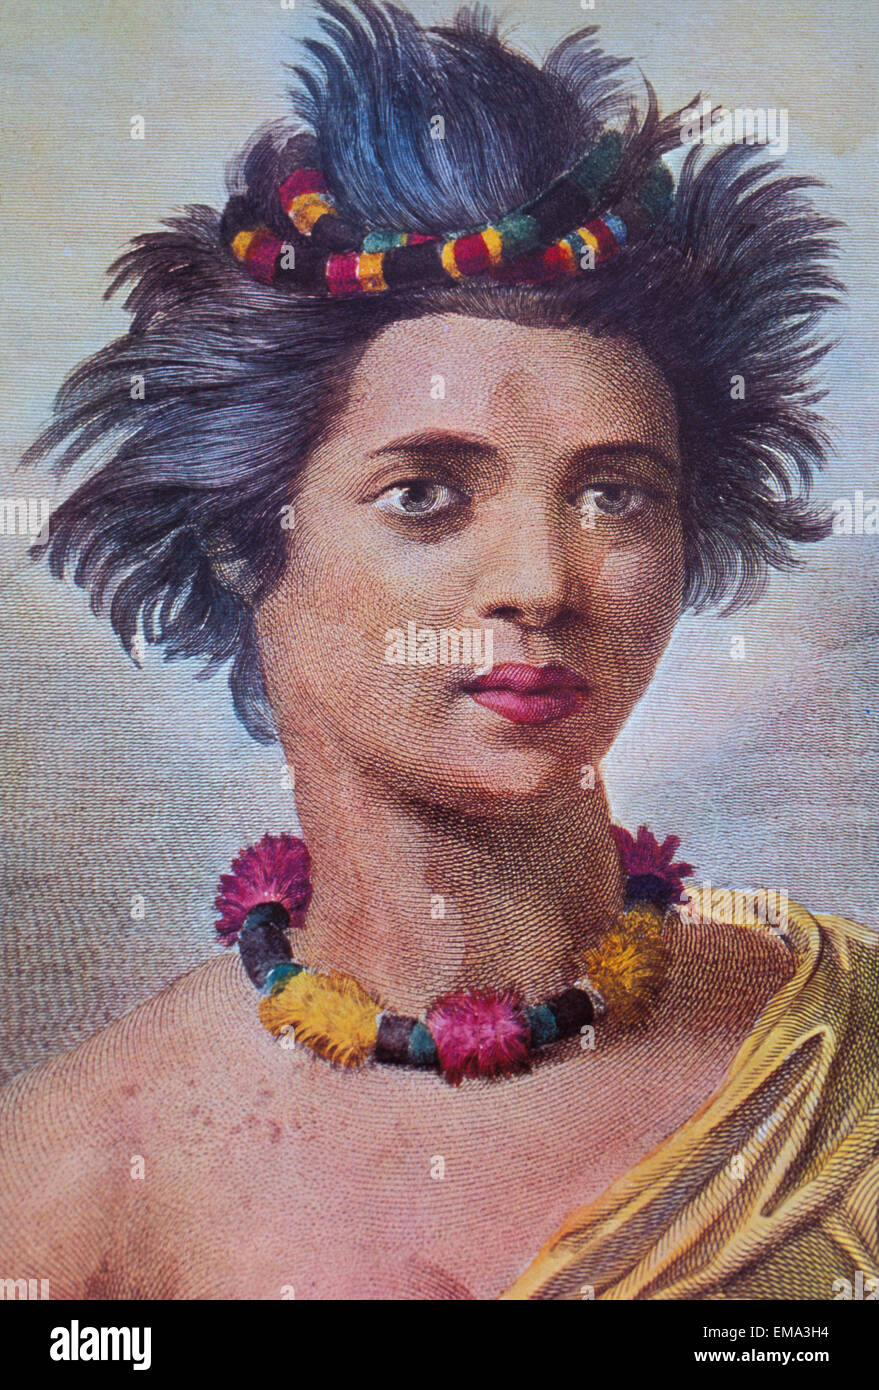 C.1780 Portrait Of Woman From The Sandwich Islands, After John Webber, Color Stock Photo